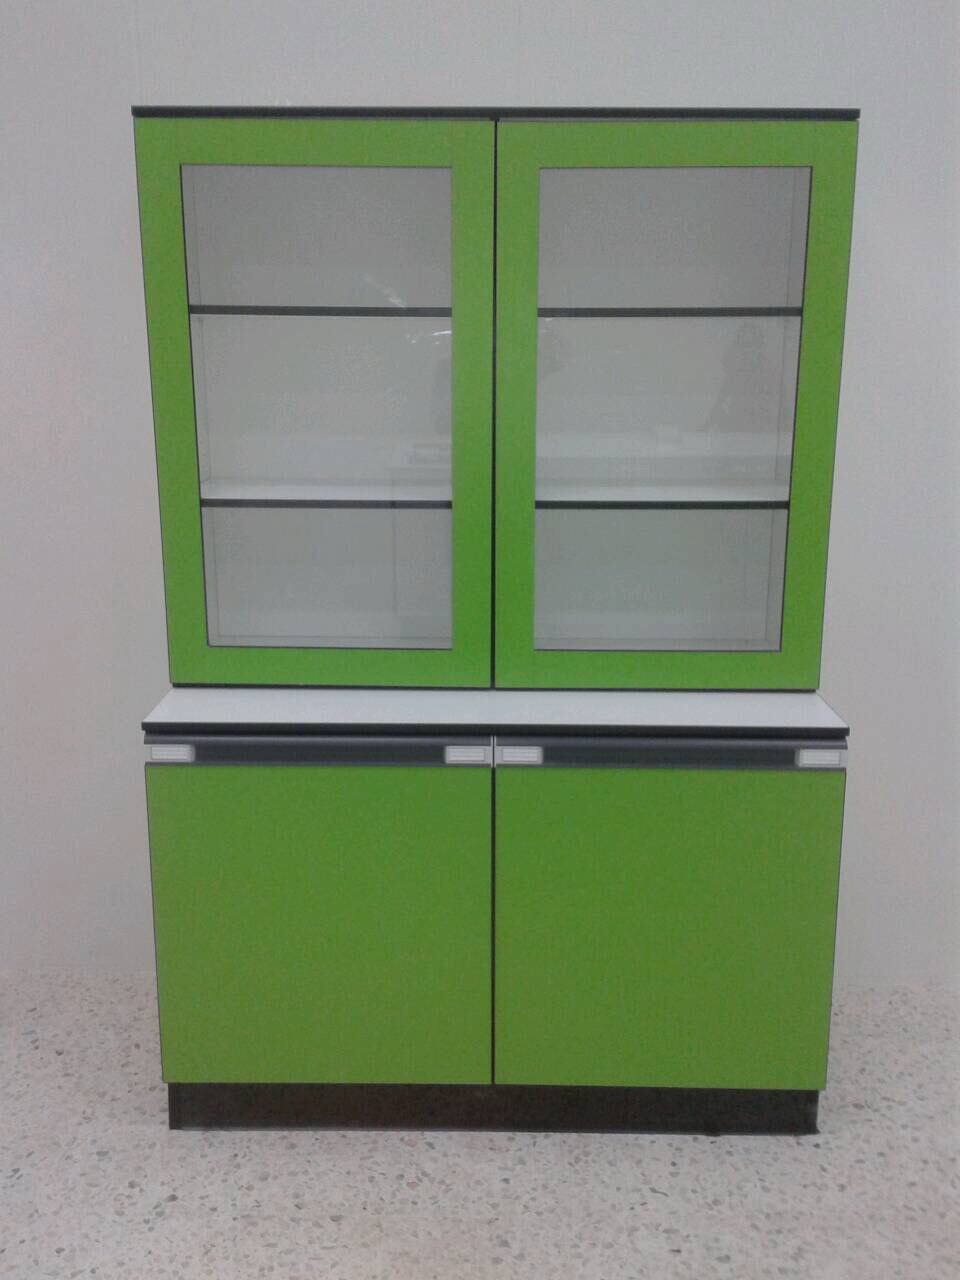 Chemical Safety Cabinet